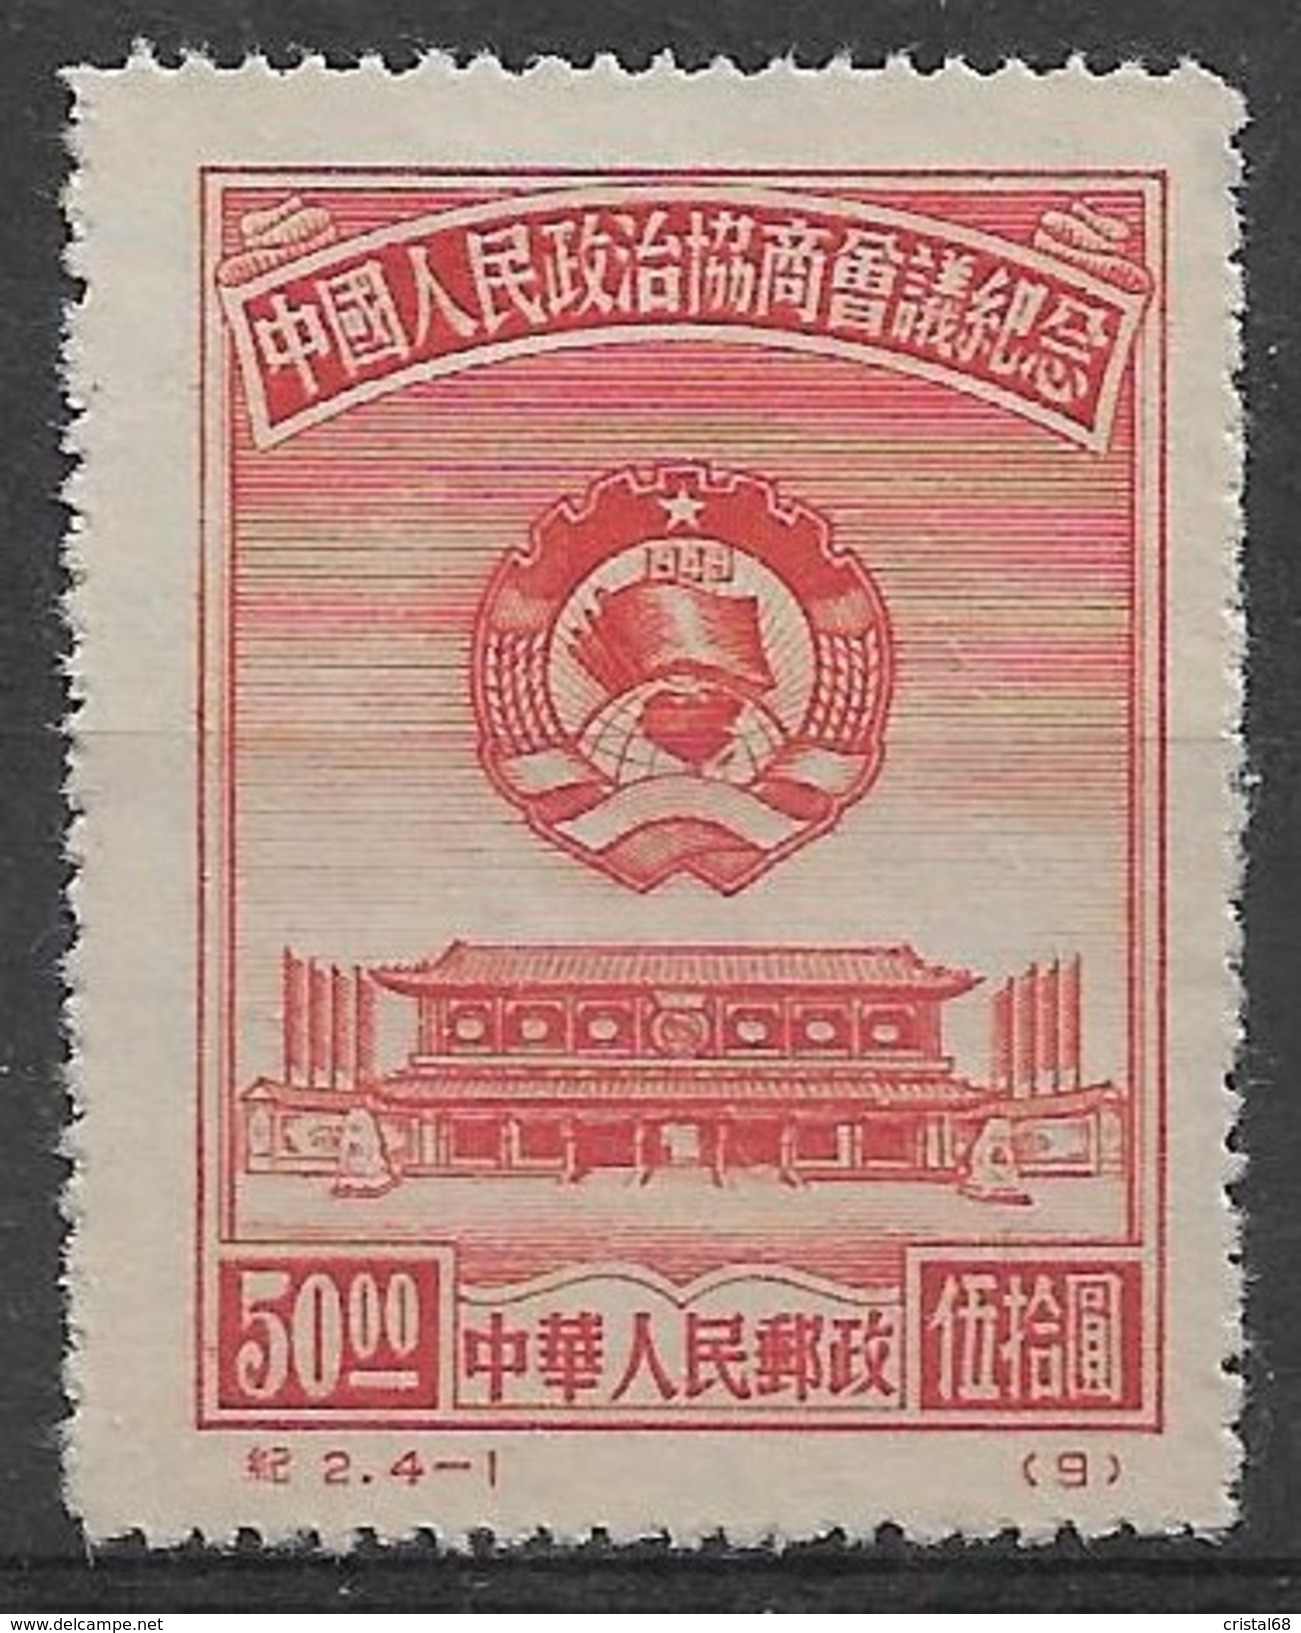 CHINE 1950 - Timbre N°827 - Neuf - Official Reprints